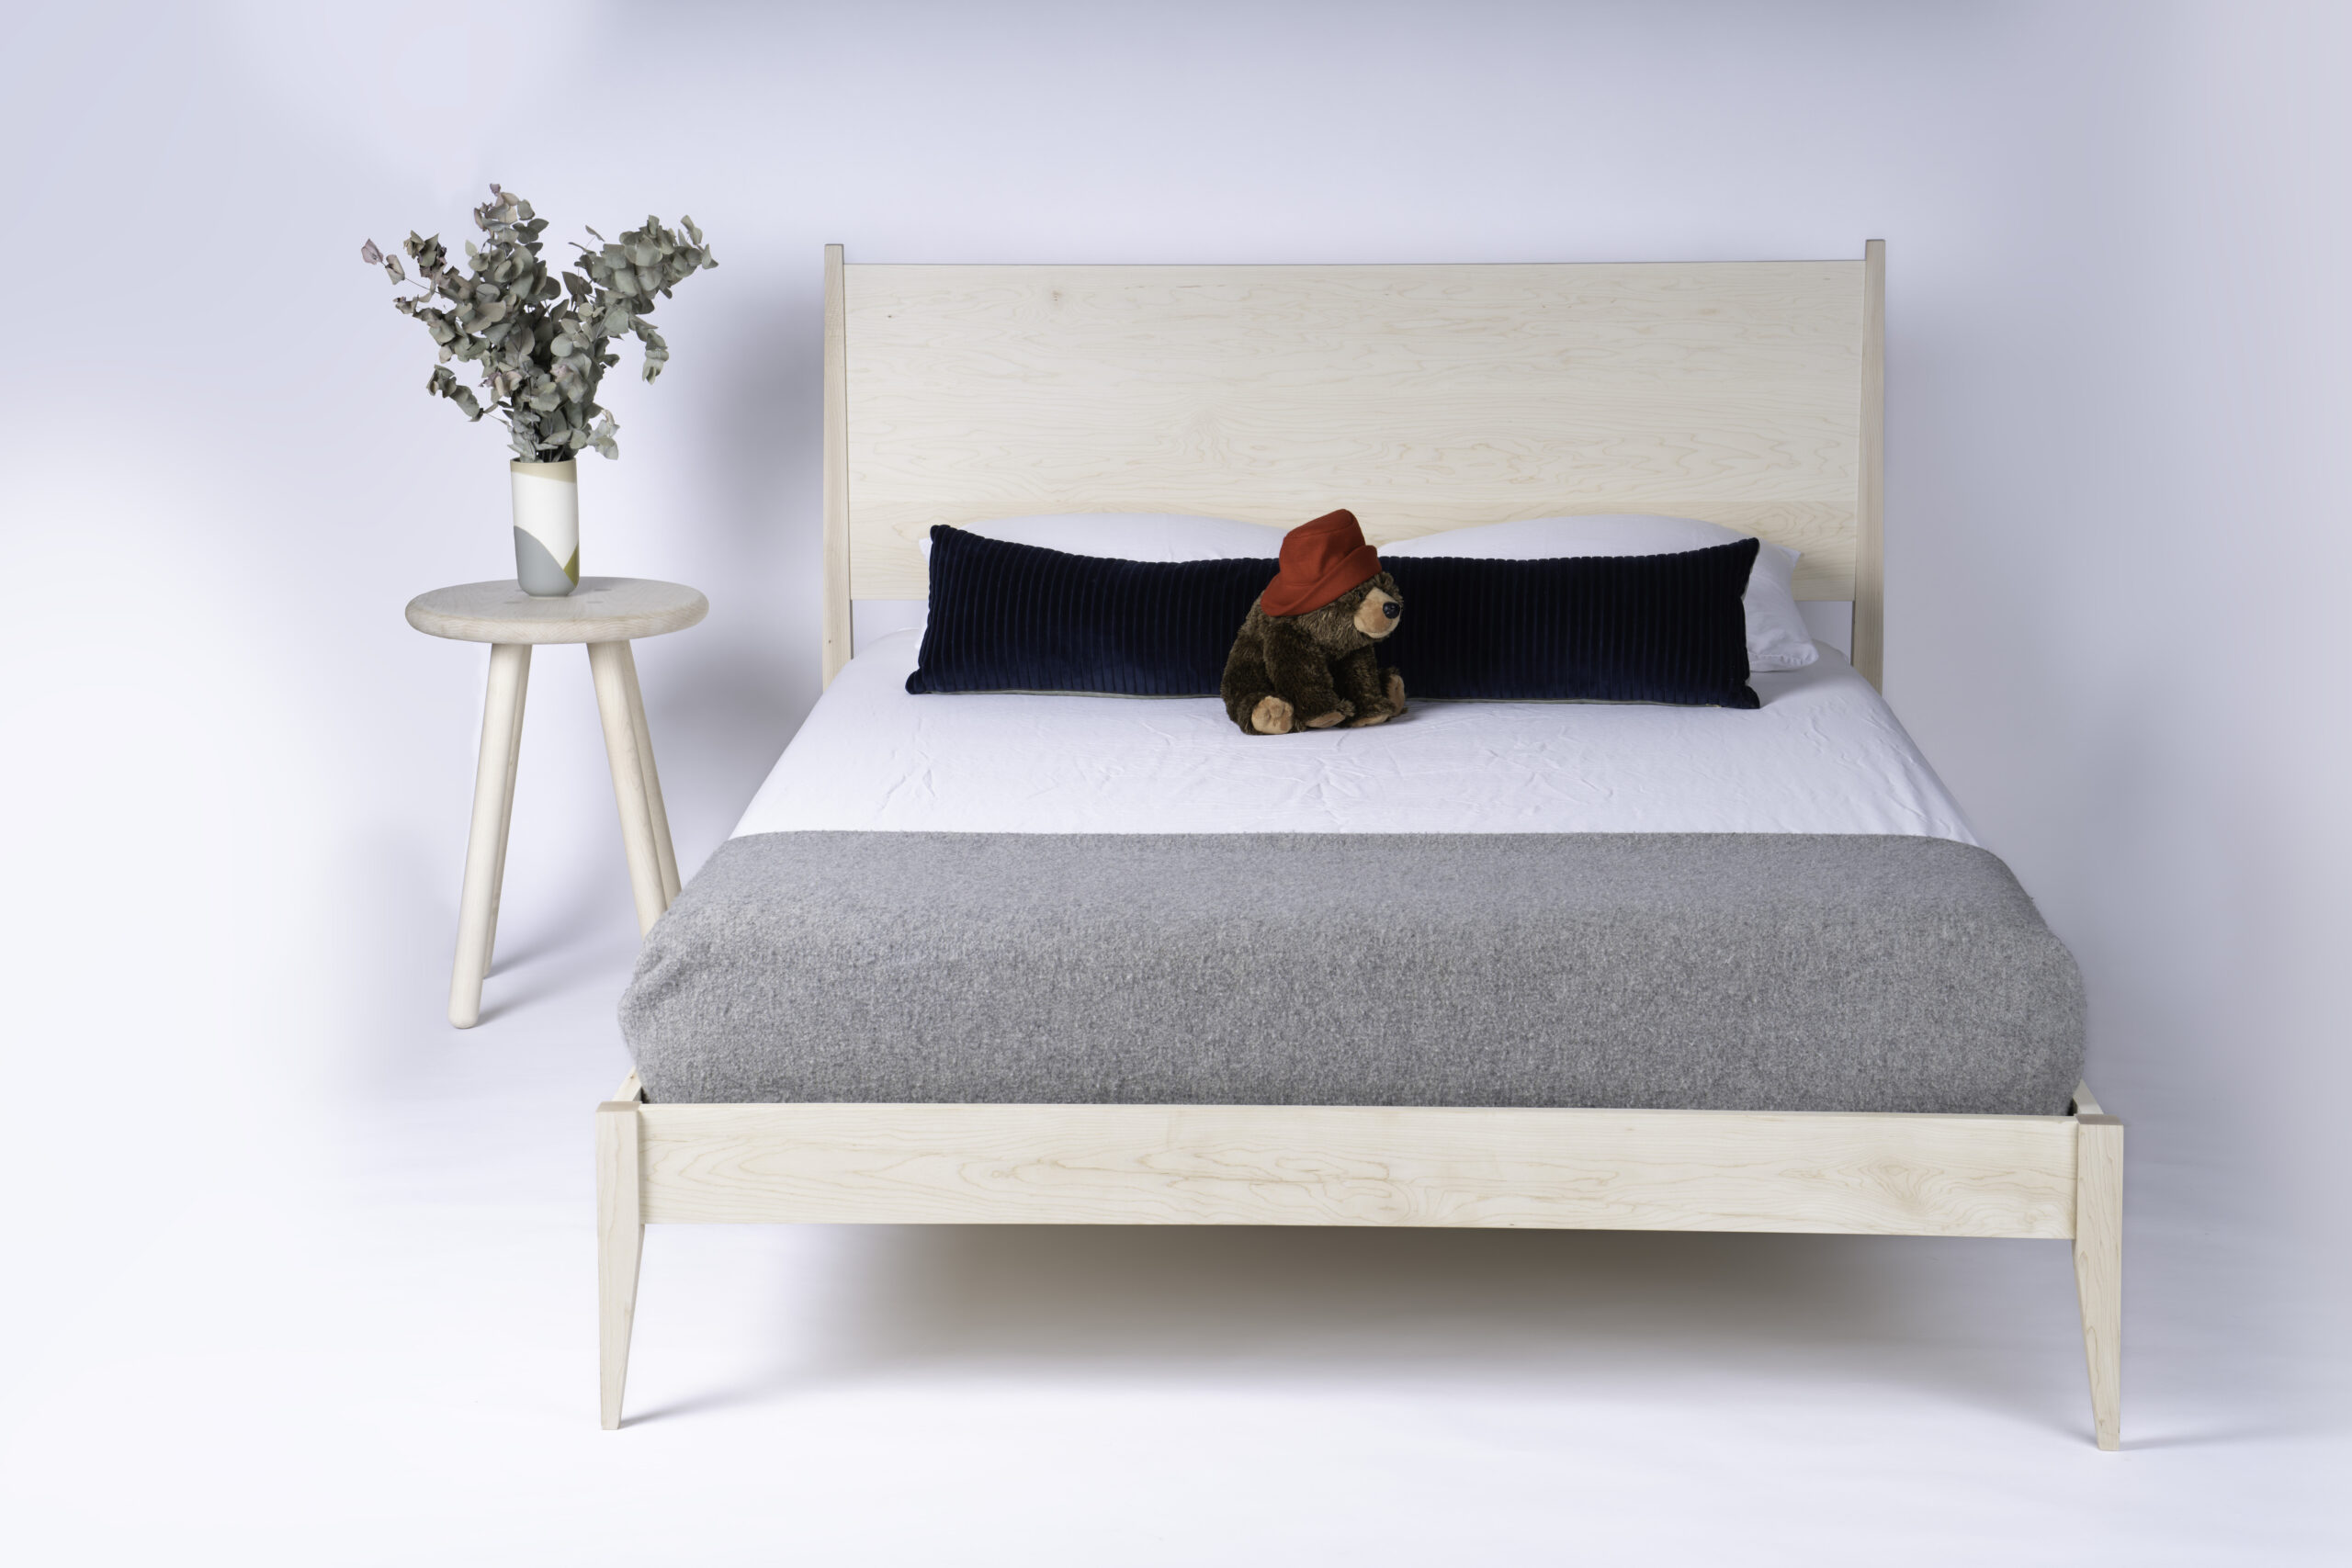 A solid maple bed with a teddy bear in a red hat on top of the mattress and a simple round side table with a plant.